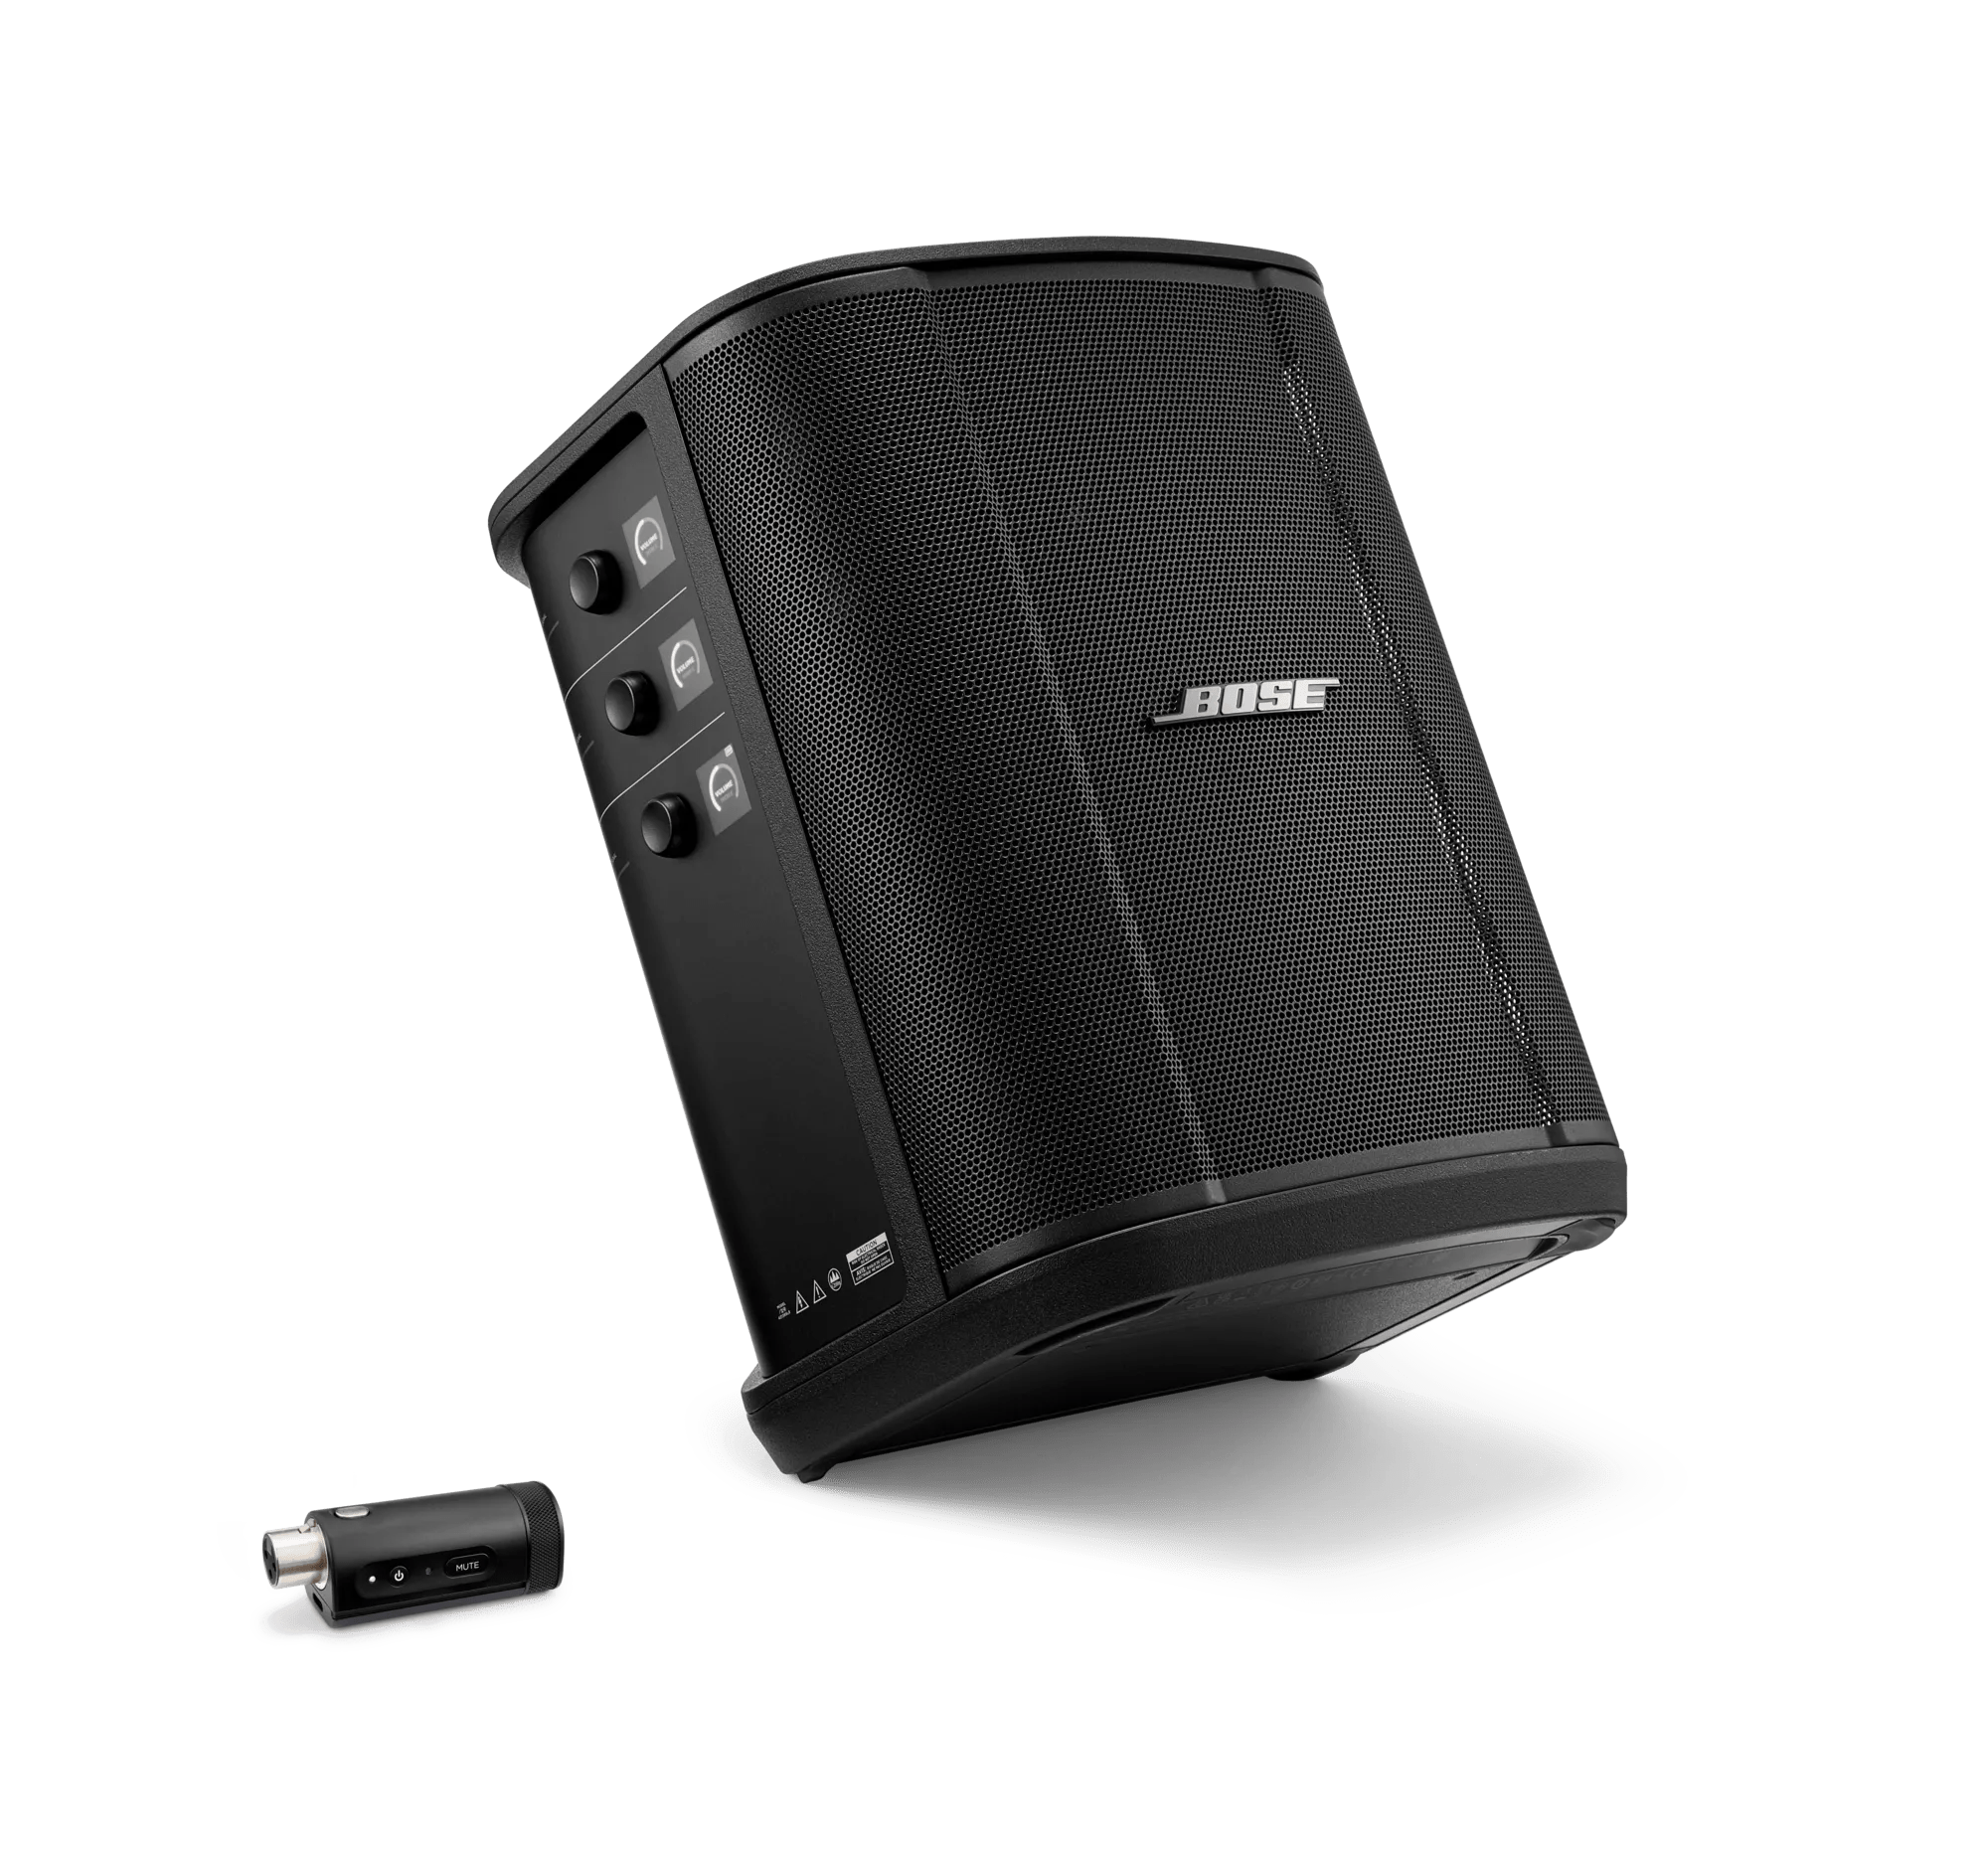 Bose S1 Bluetooth Battery Powered PA Speakers with T8S ToneMatch Mixer